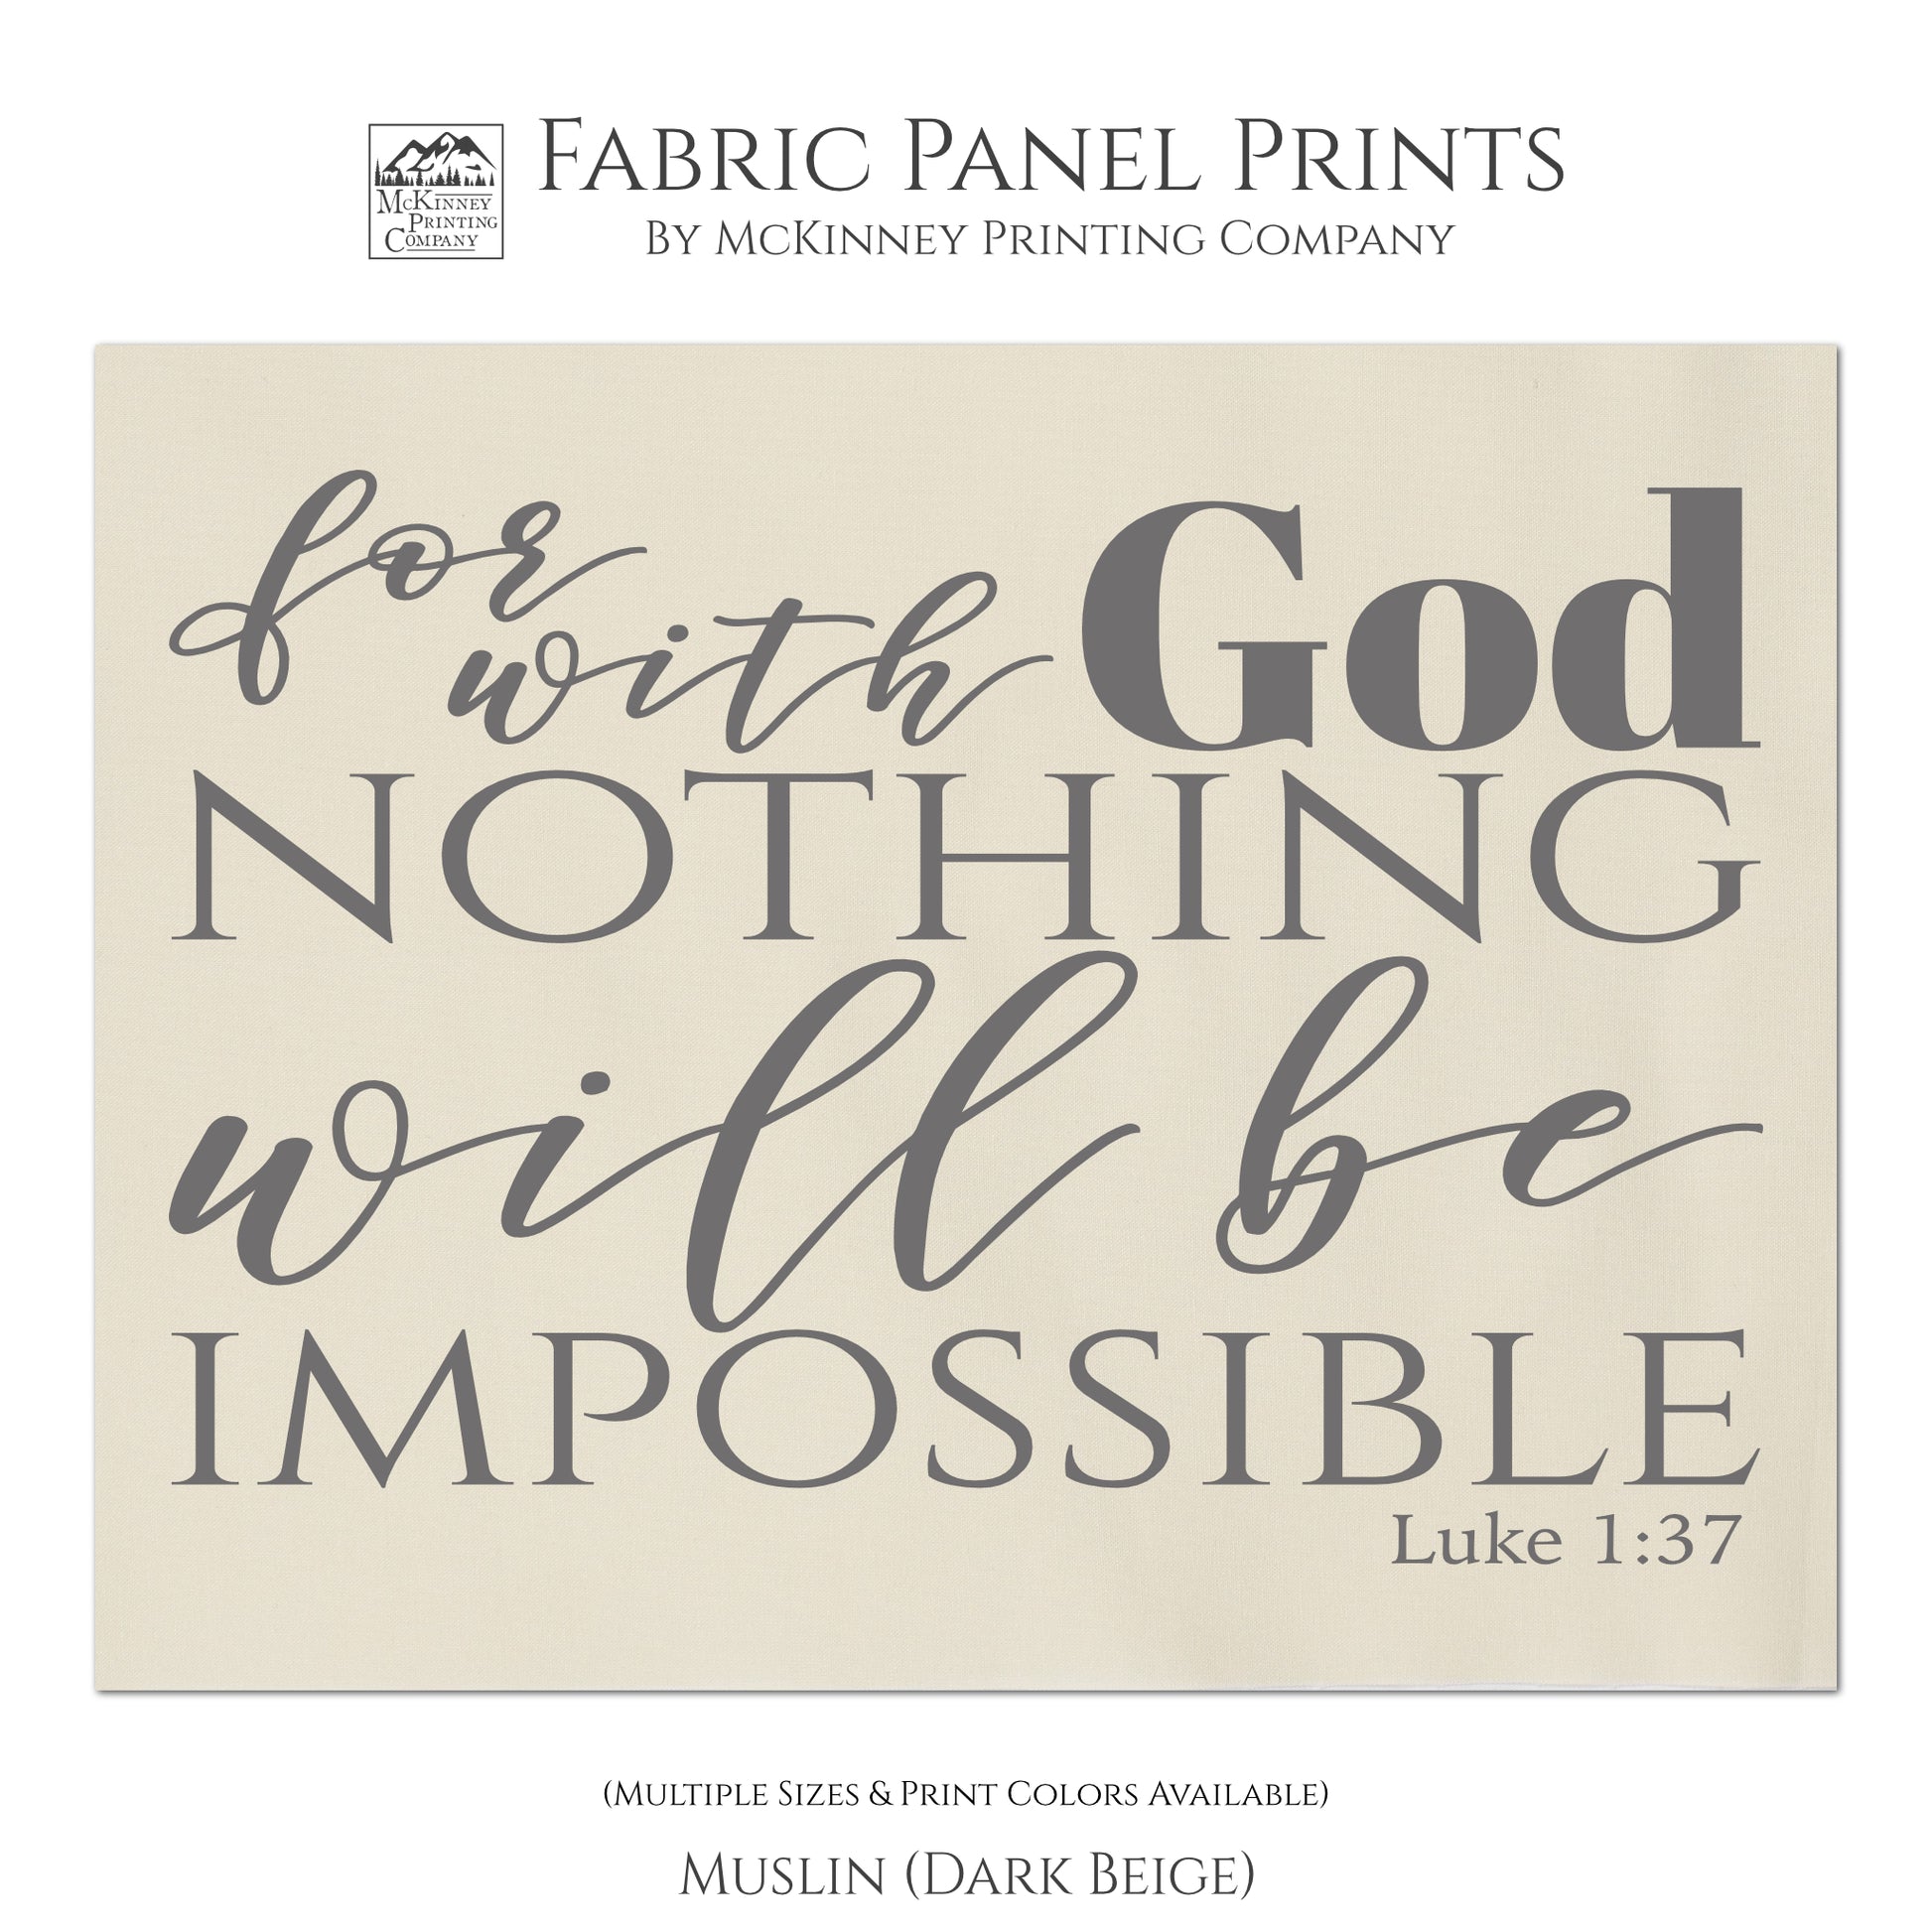 For with God Nothing will be impossible. Luke 1 37, Bible Verse Wall Art, Fabric Panel Print, Quilt Block - Muslin